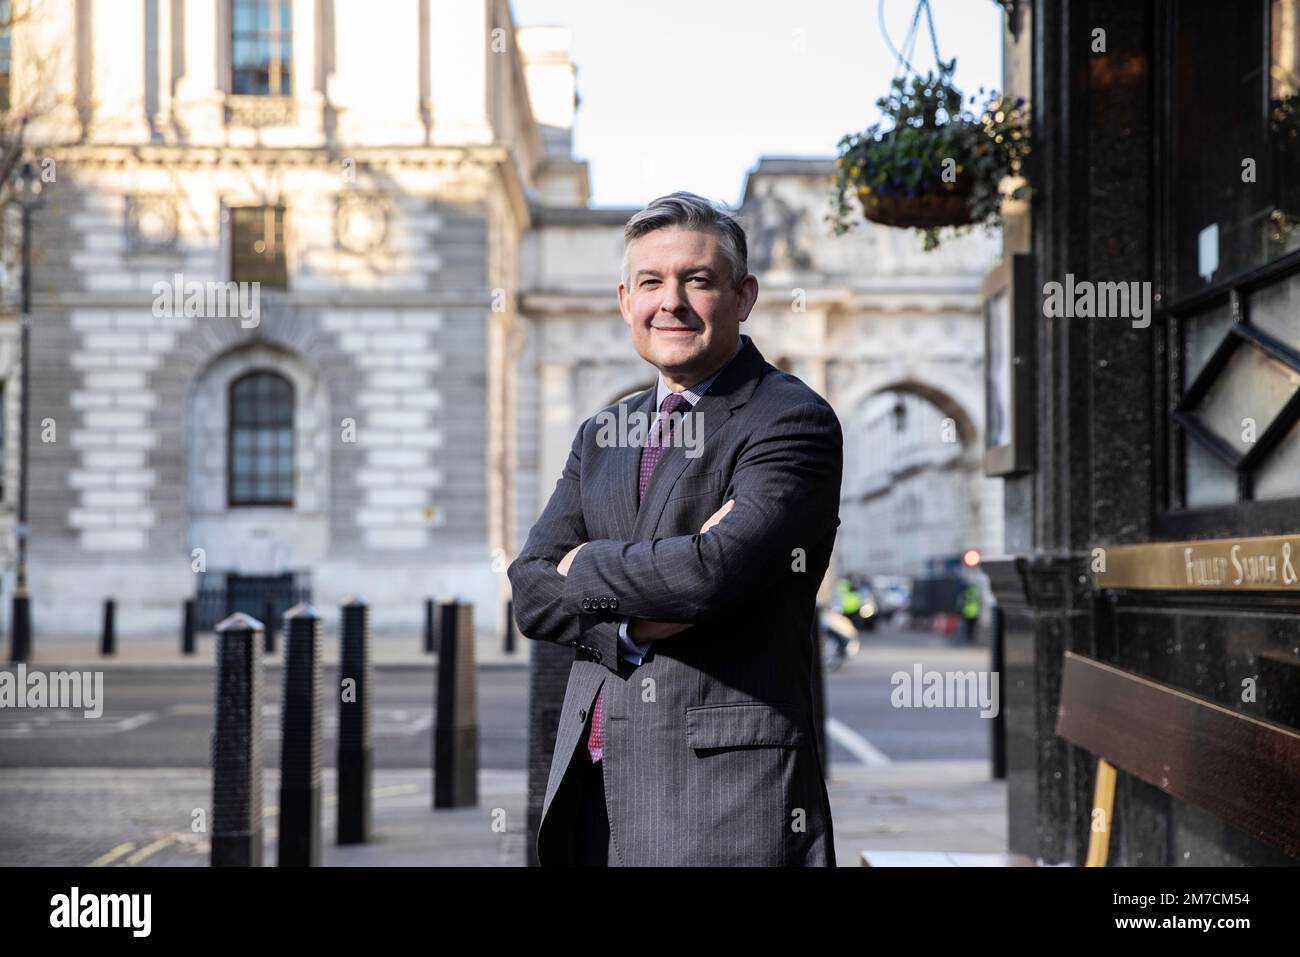 Jonathan Ashworth, Shadow Secretary of State for Work and Pensions since 2021. PHOTO:JEFF GILBERT 15th December 2022, London, UK Stock Photo